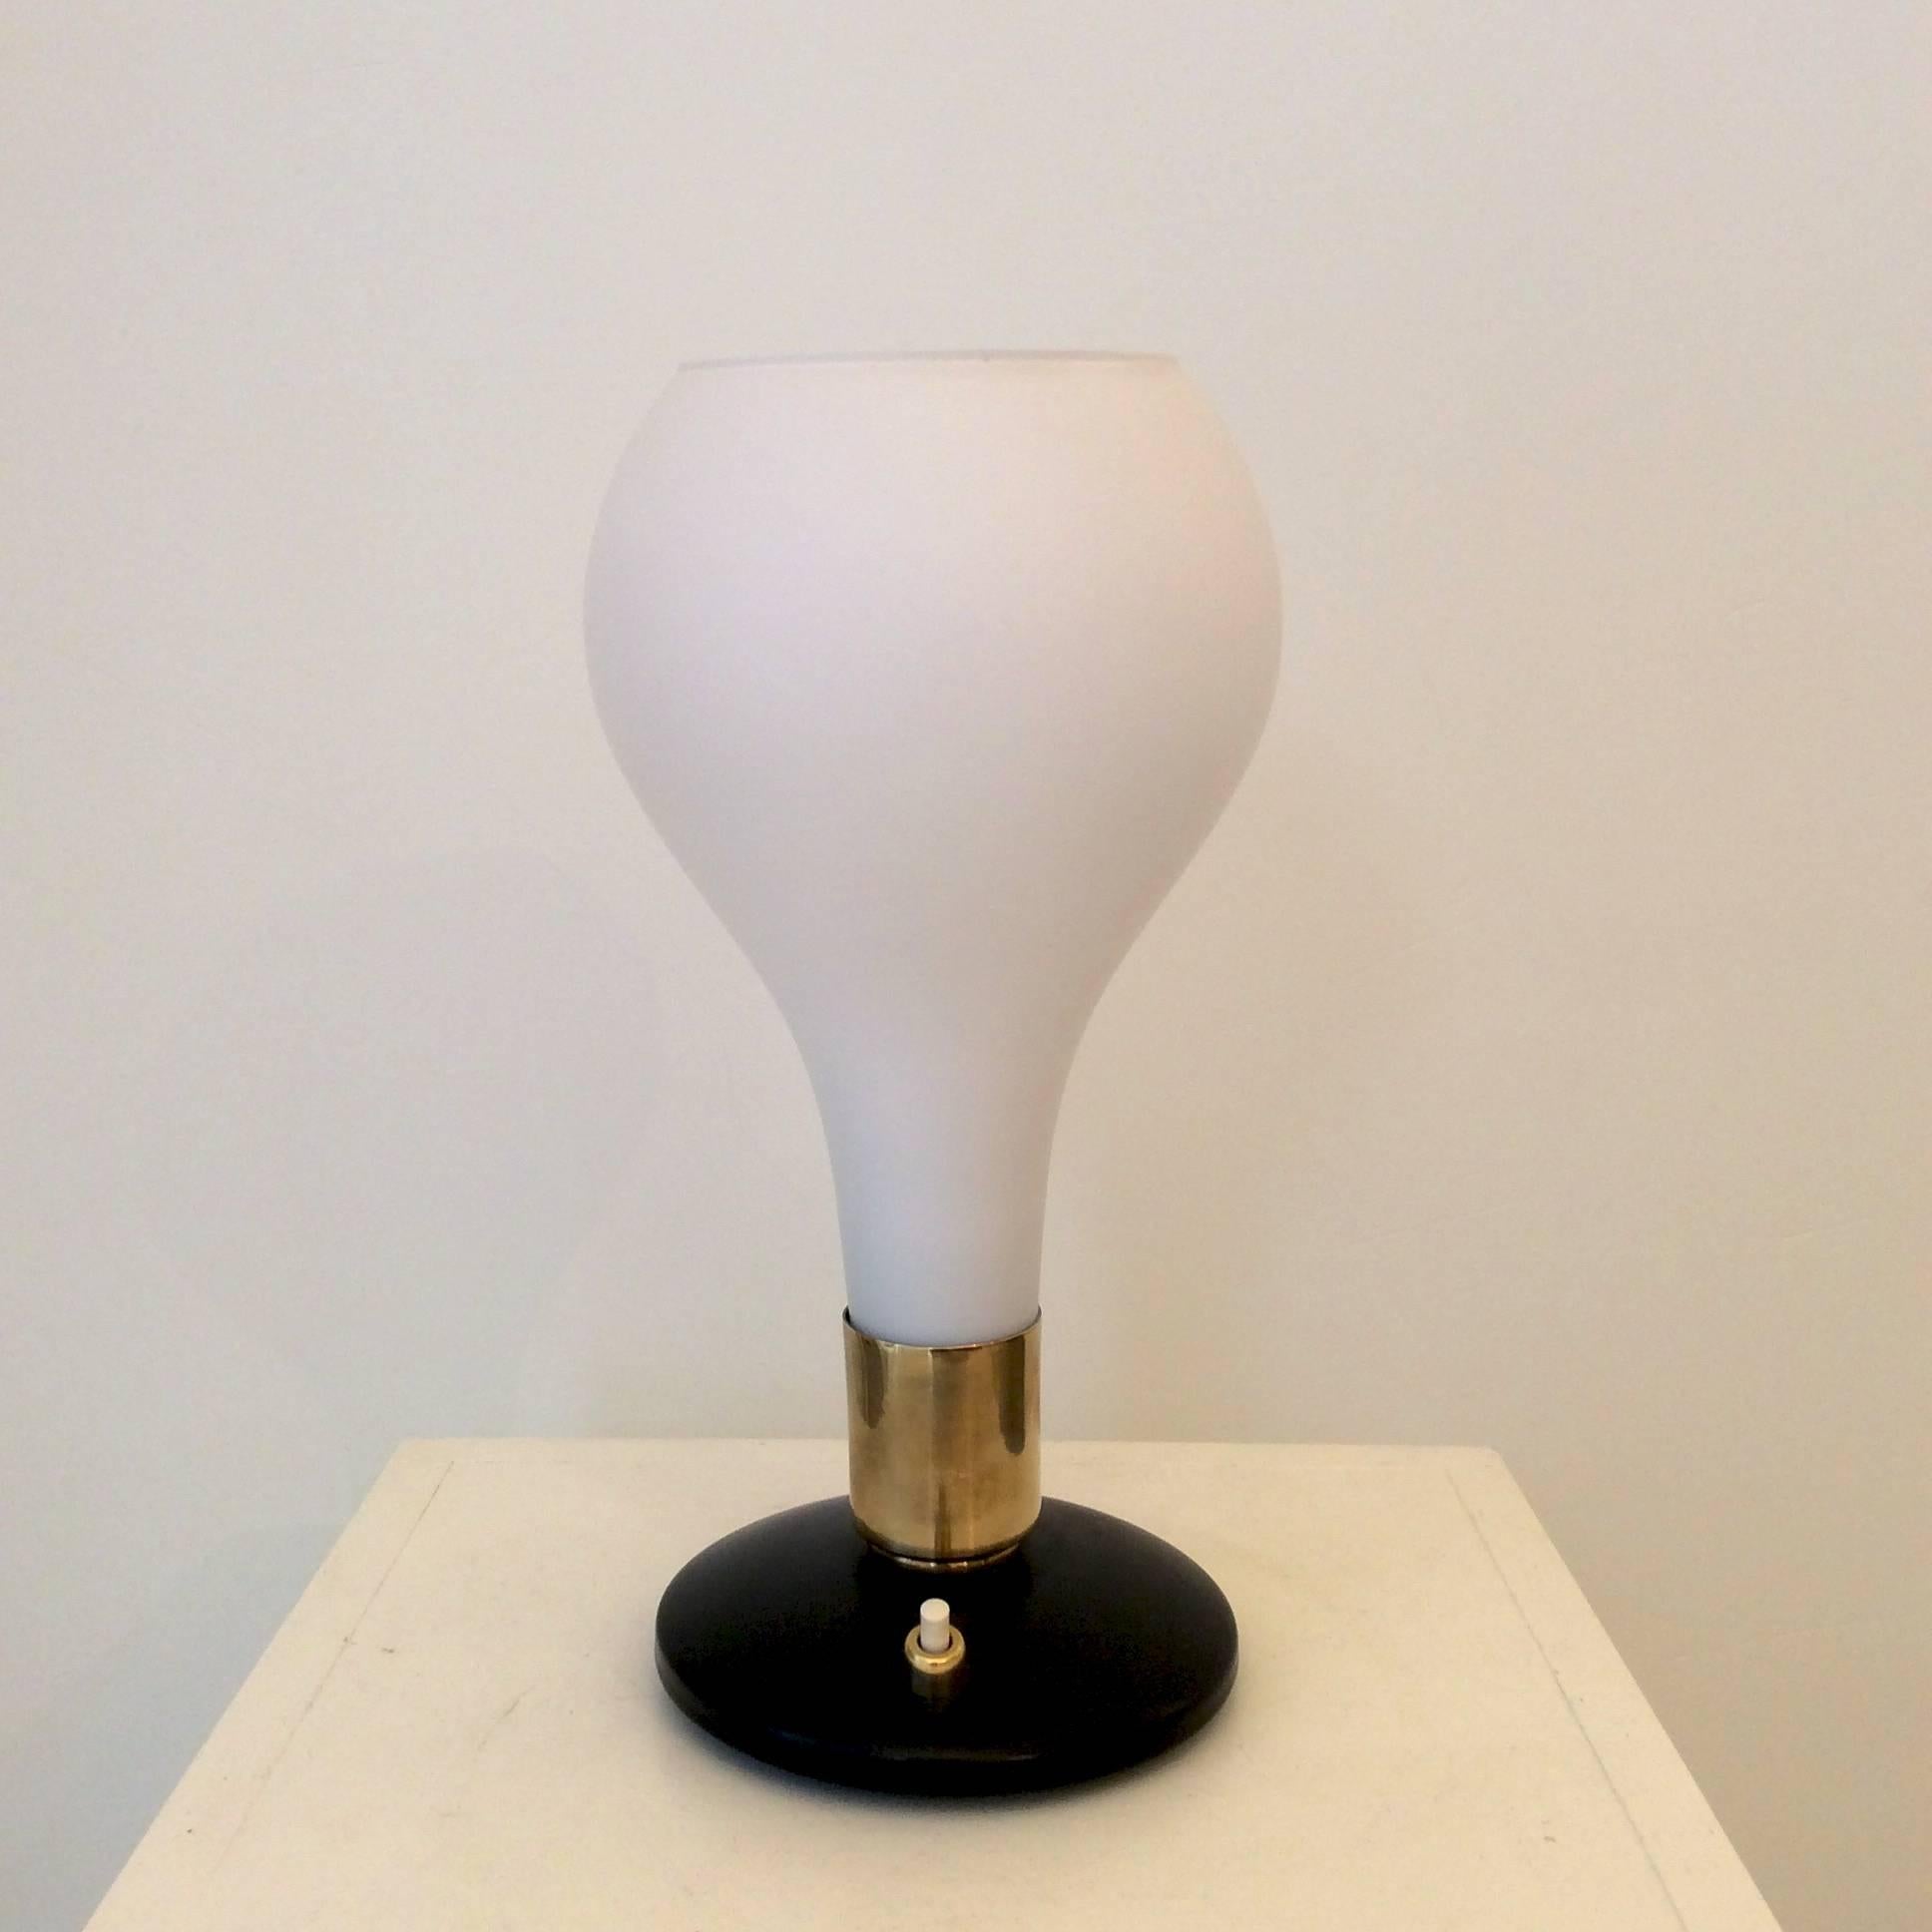 Table lamp attributed to Stilnovo, circa 1960, Italy.
Black lacquered metal base, brass and white opaline.
One E14 bulb of 40 w.
Dimensions: H 28 cm, D 14 cm.
Good original condition.
We ship anywhere in the world, please feel free to request a